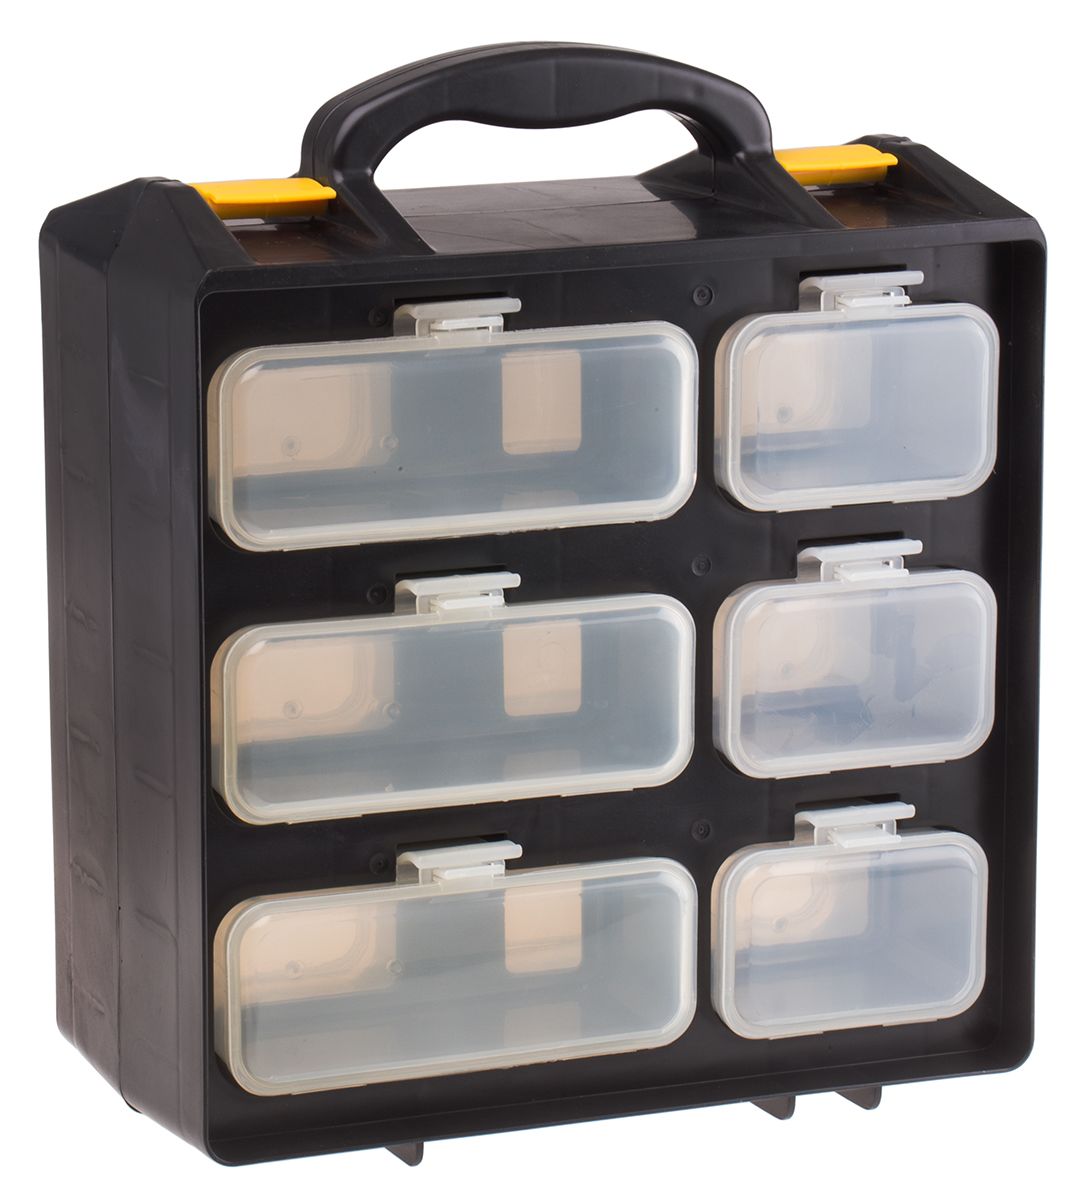 RS PRO 12 Cell Black PP Compartment Box, 340mm x 278mm x 145mm